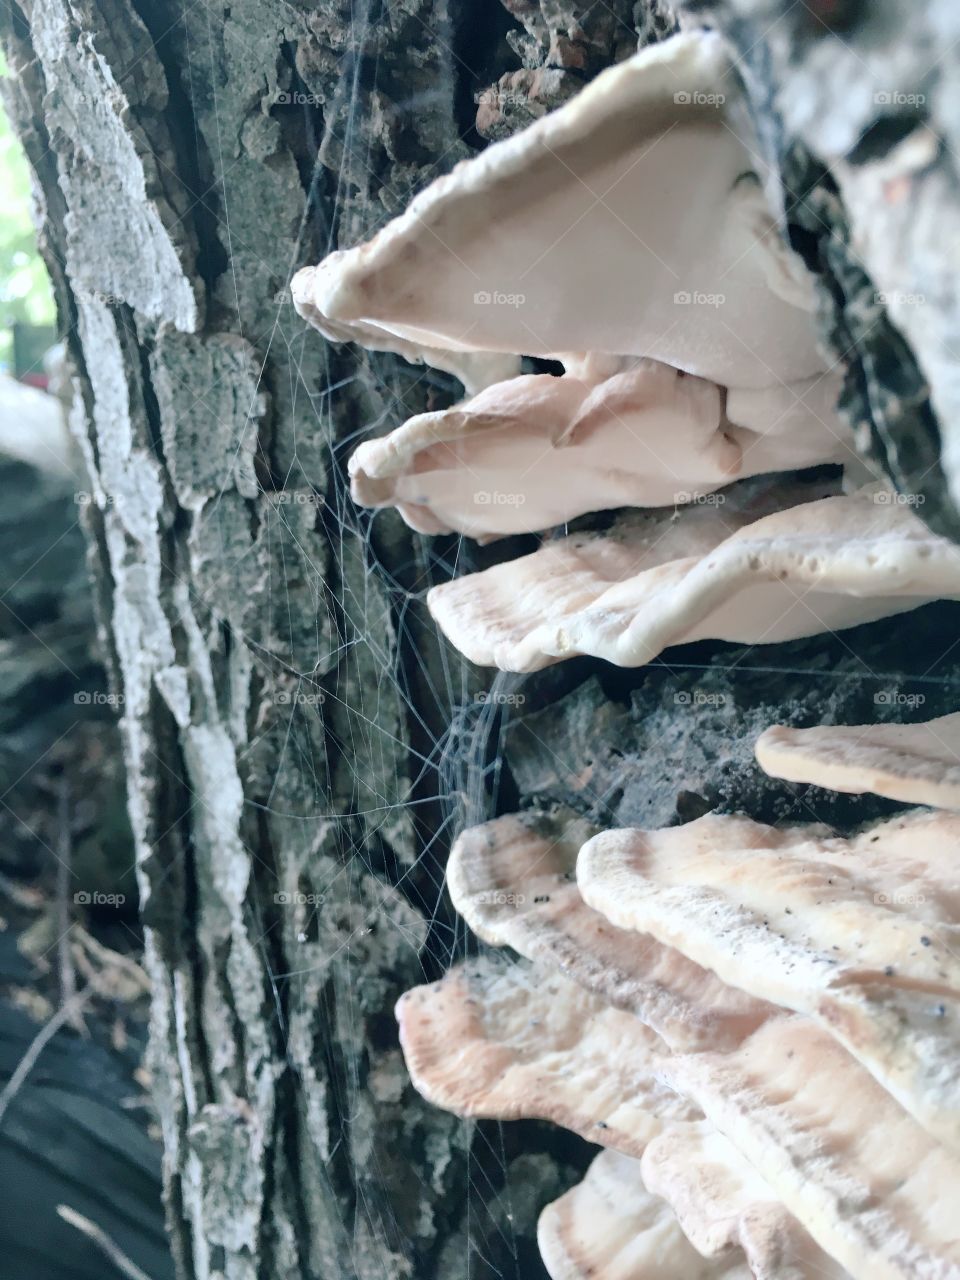 Nothing the smell of mushrooms on a tree